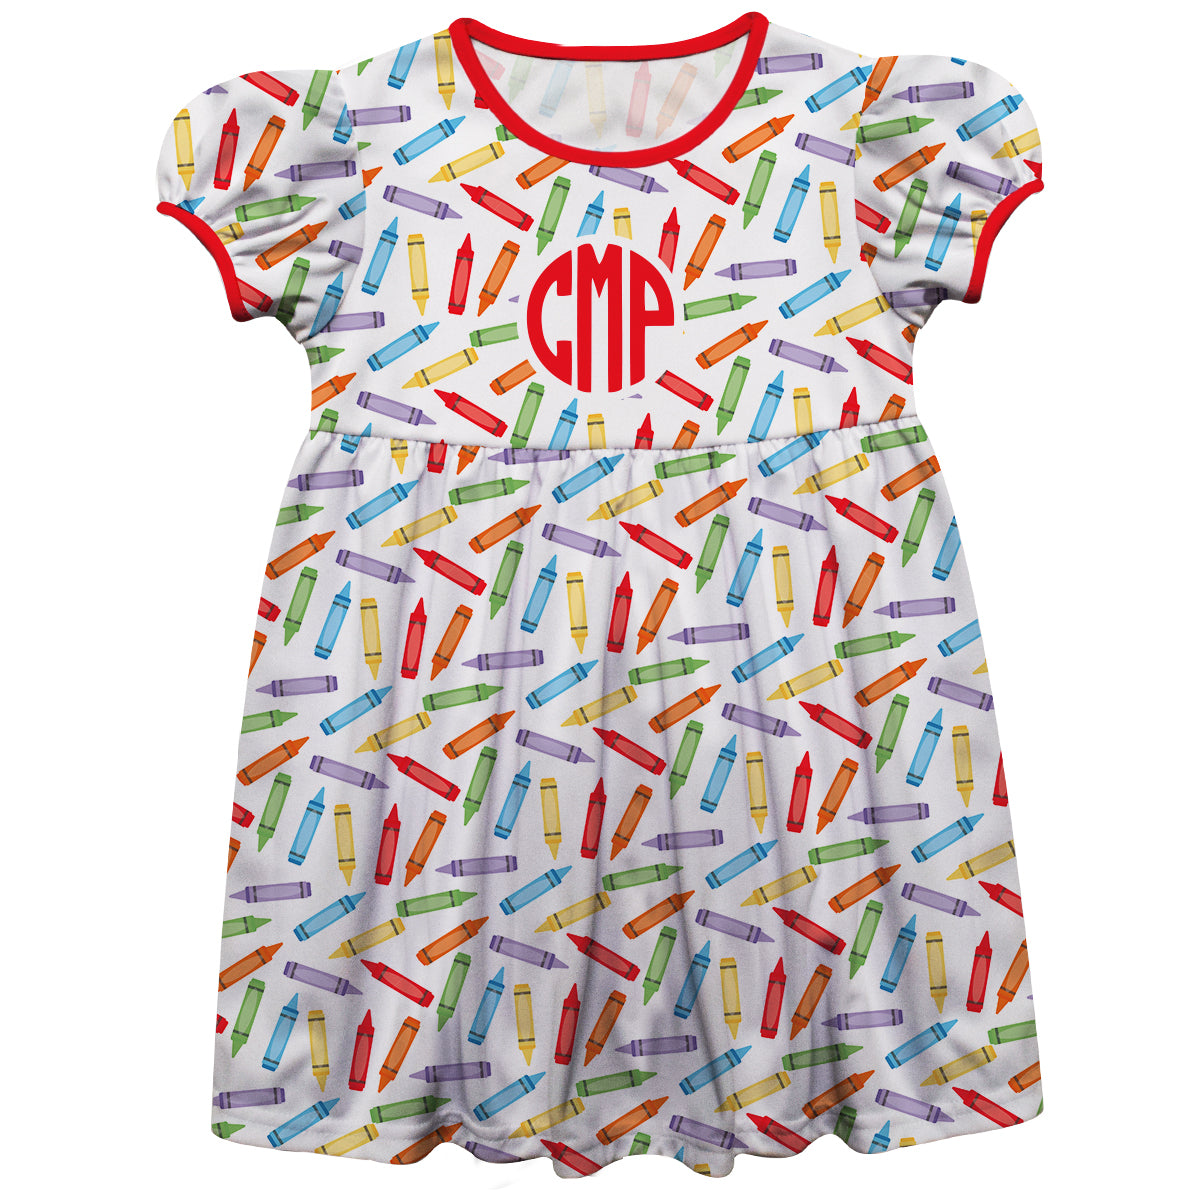 Pencils Print Personalized Monogram White and Red Short Sleeve Epic Dress - Wimziy&Co.